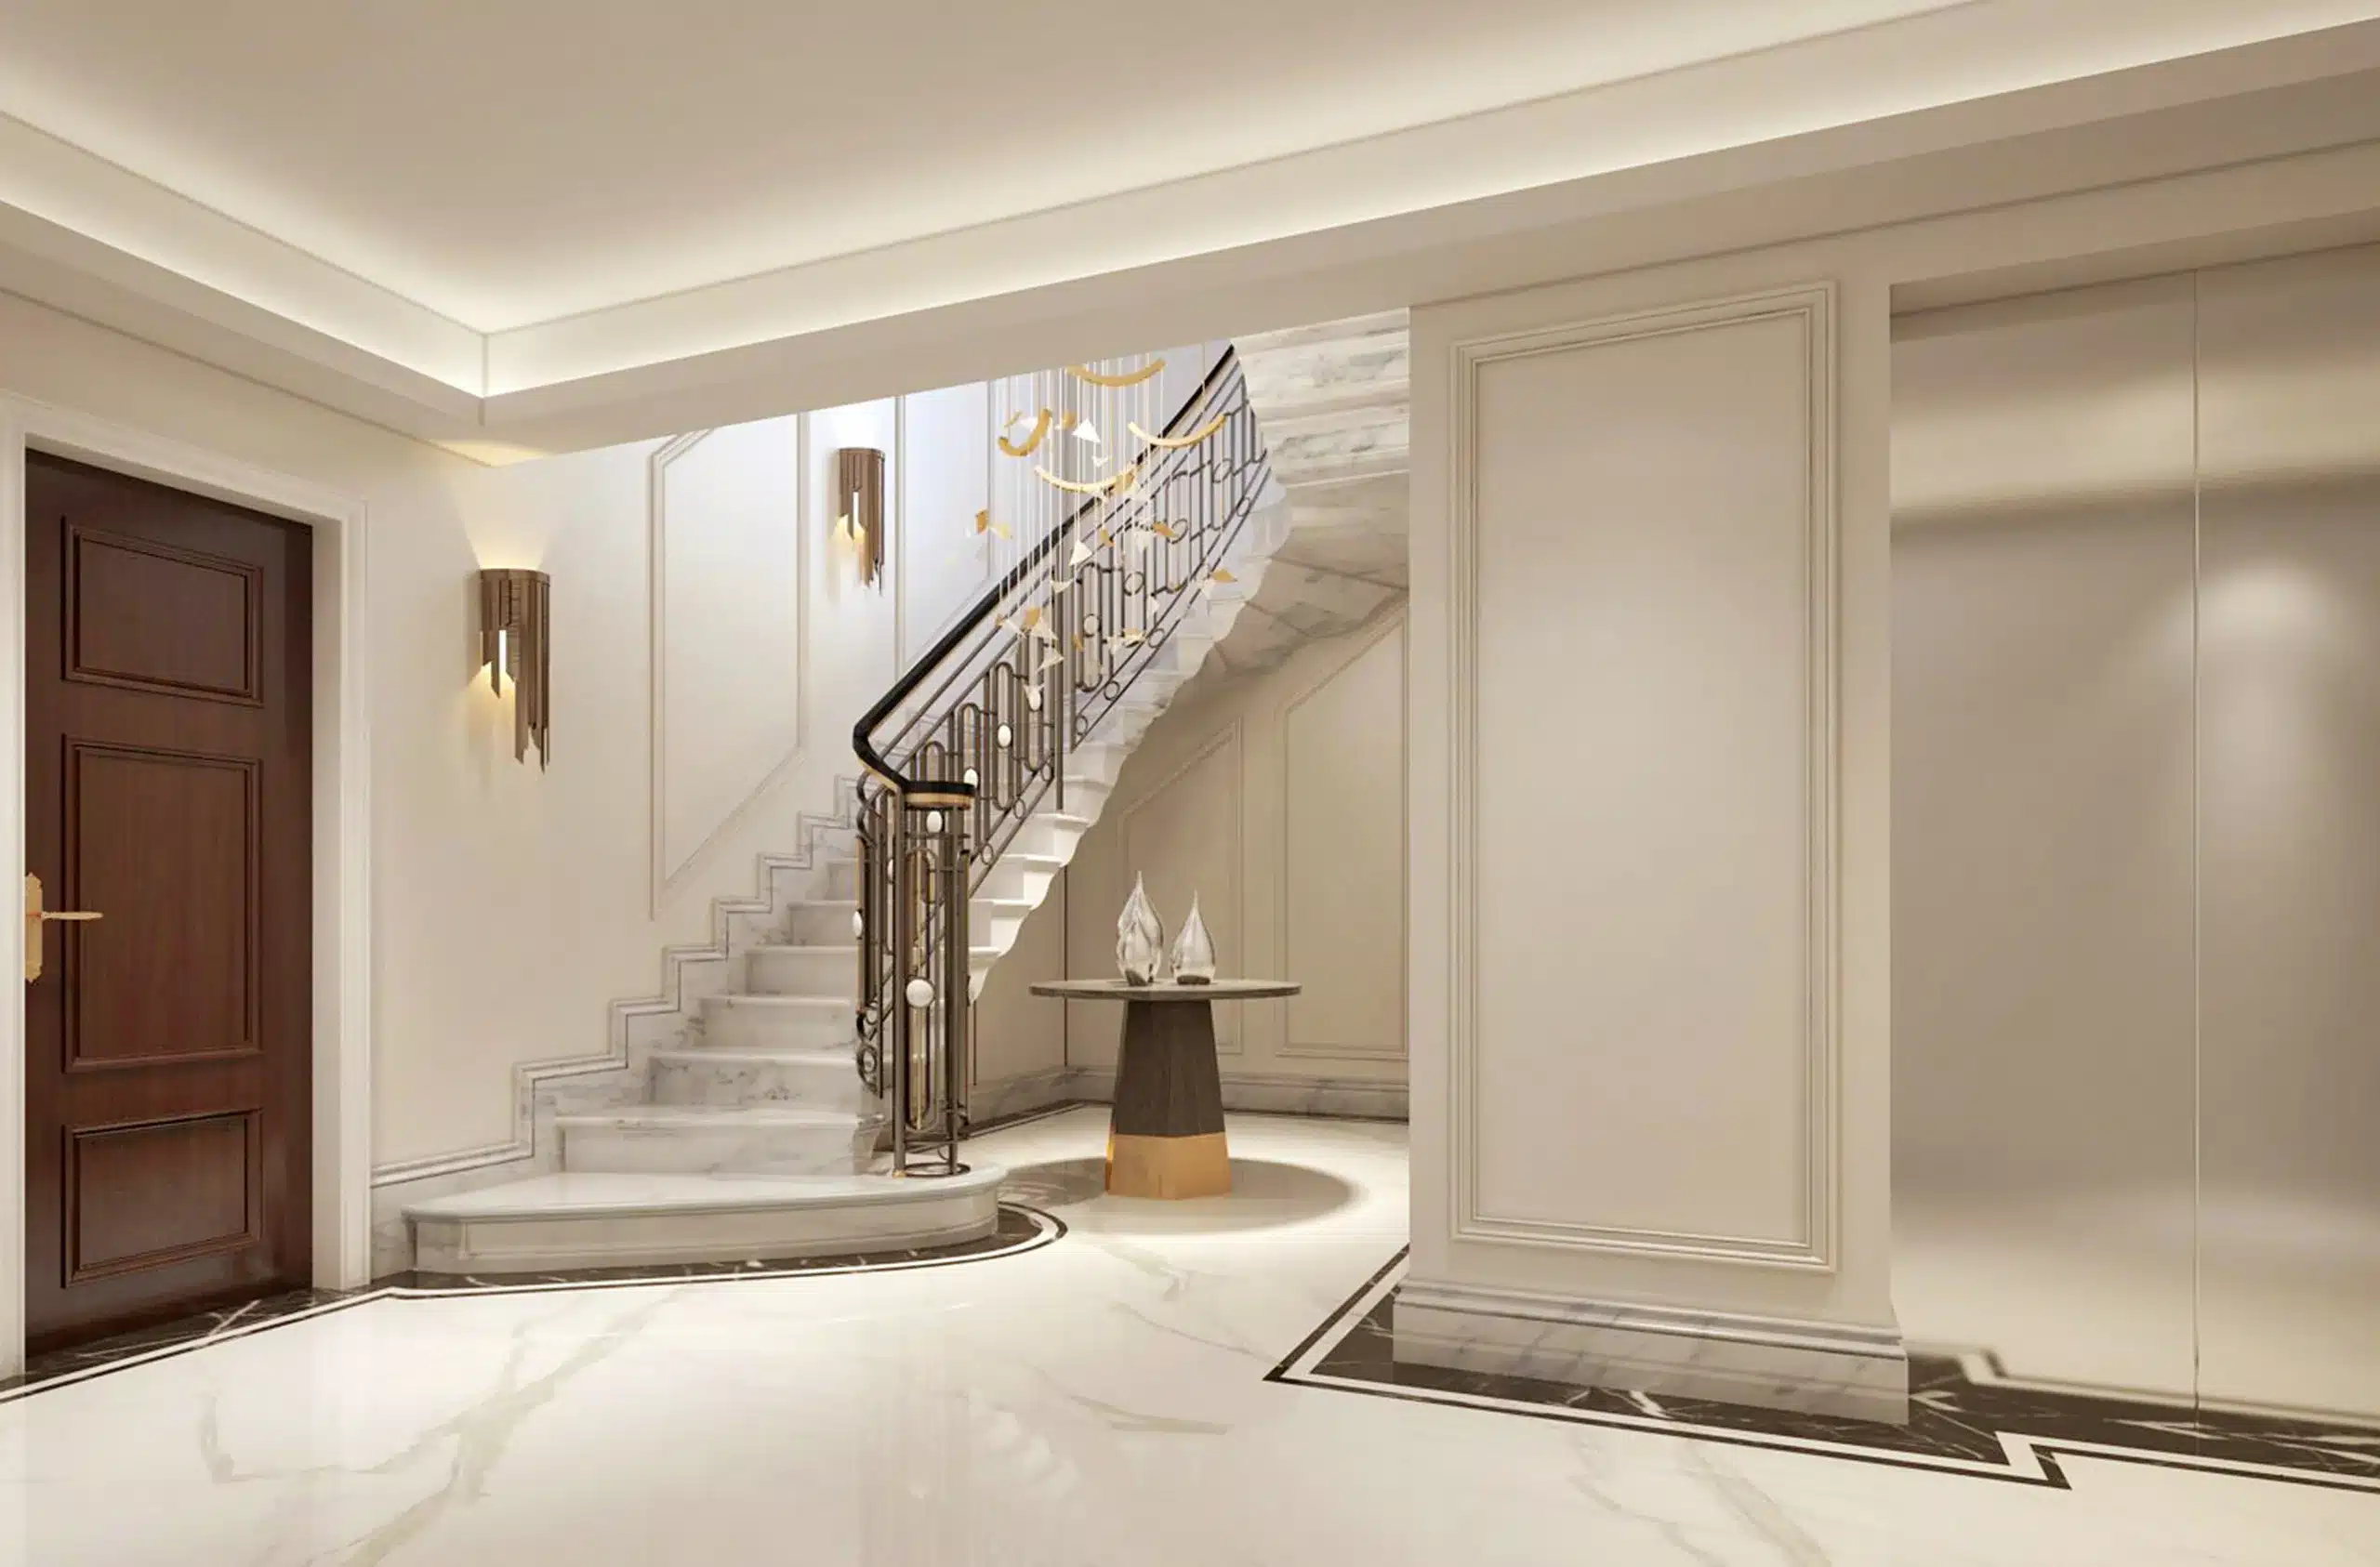 An entry way in an interior design project completed by katharine pooleys london based studio